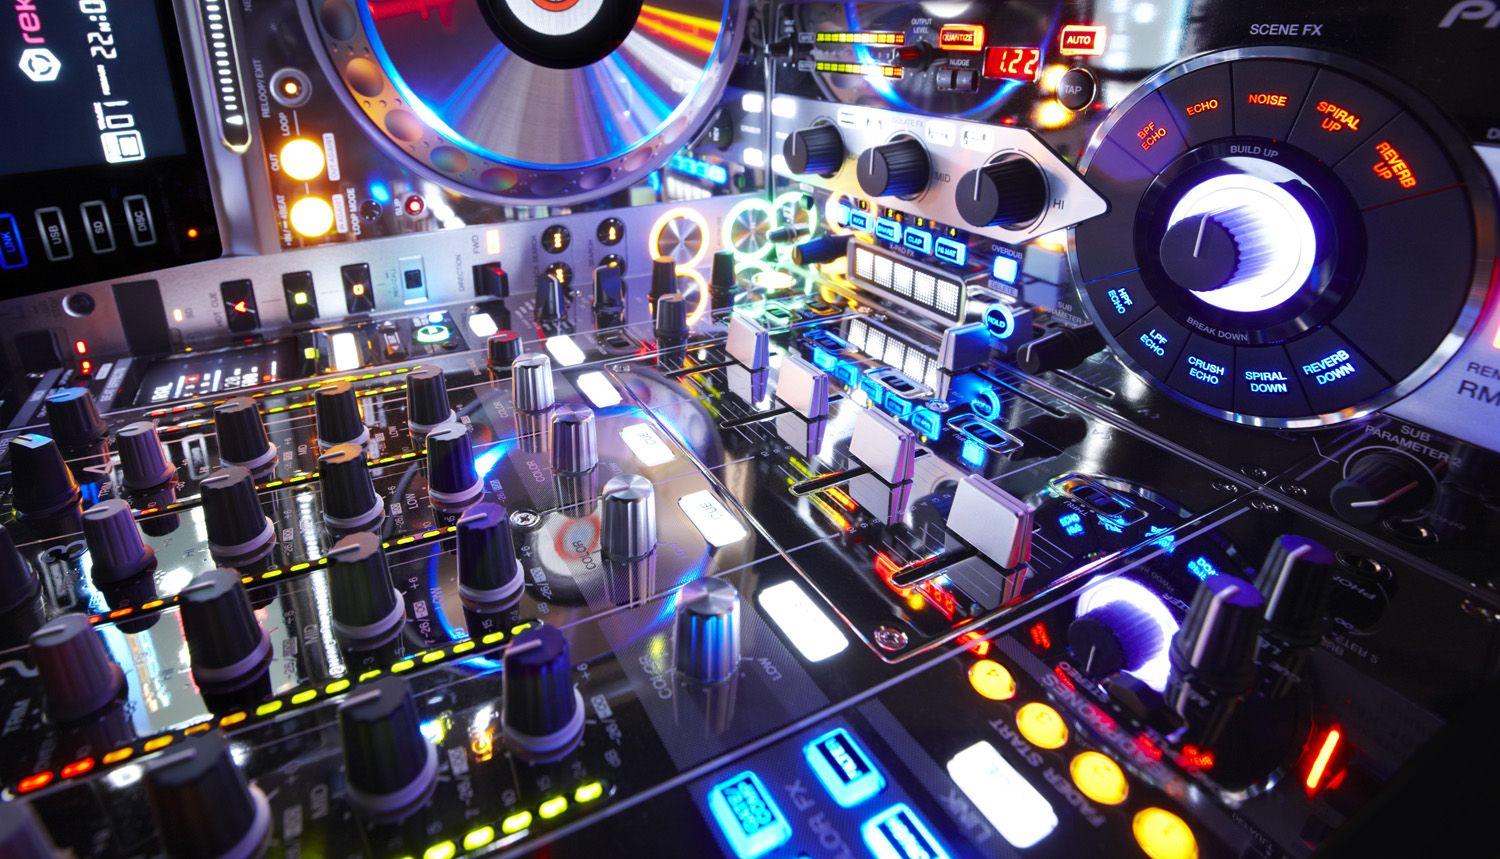 Free Amazing Pioneer DJ Image on your Android